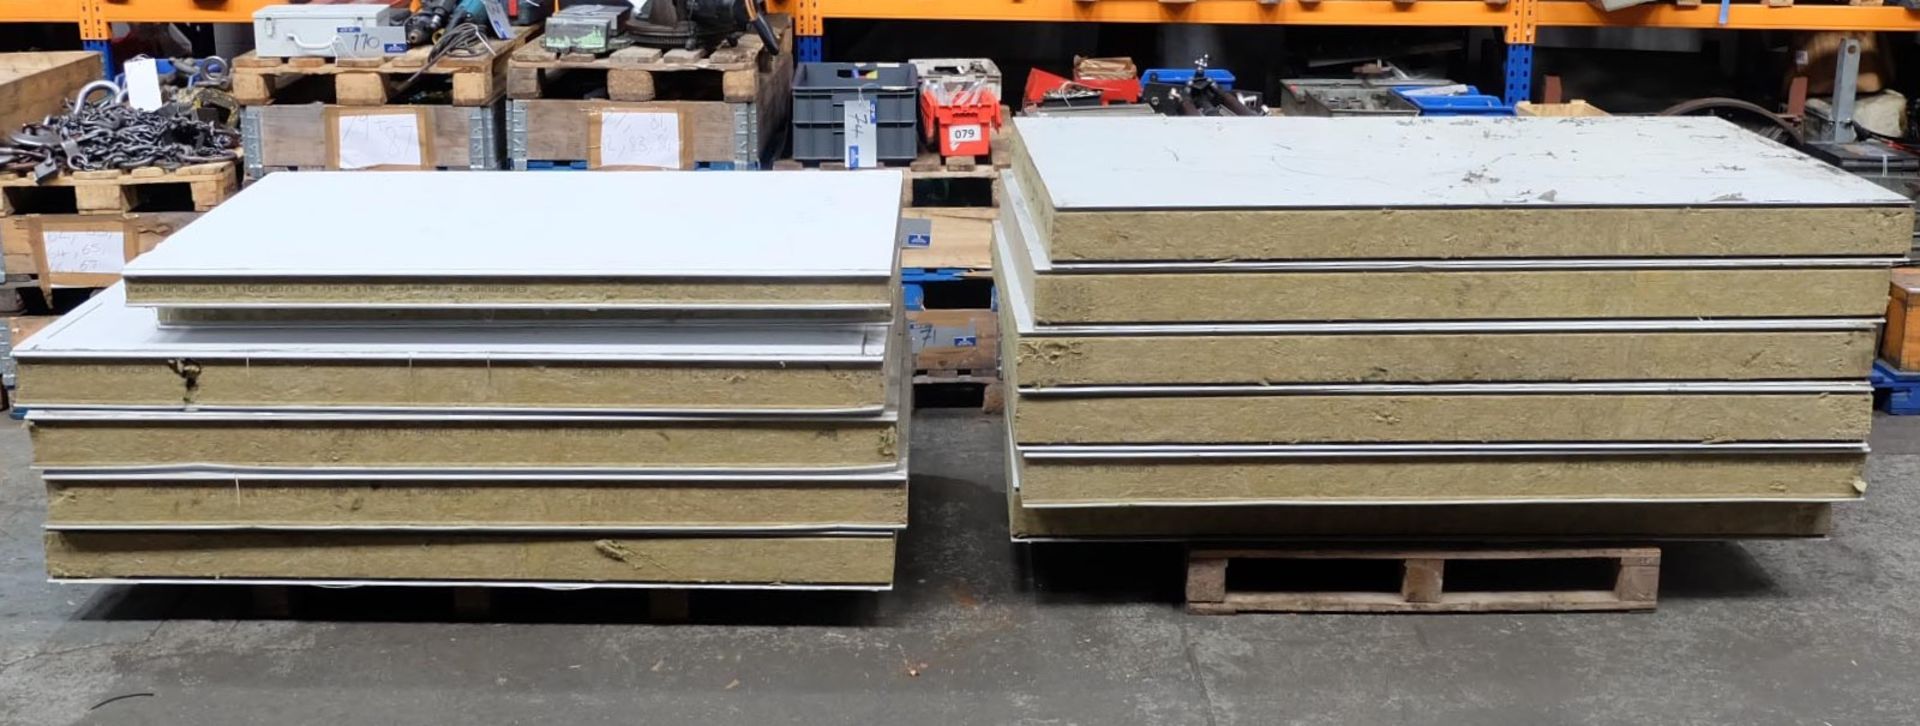 12 Insulated Panels: 9-2100mm x 1200mm x 150mm Thi - Image 2 of 11